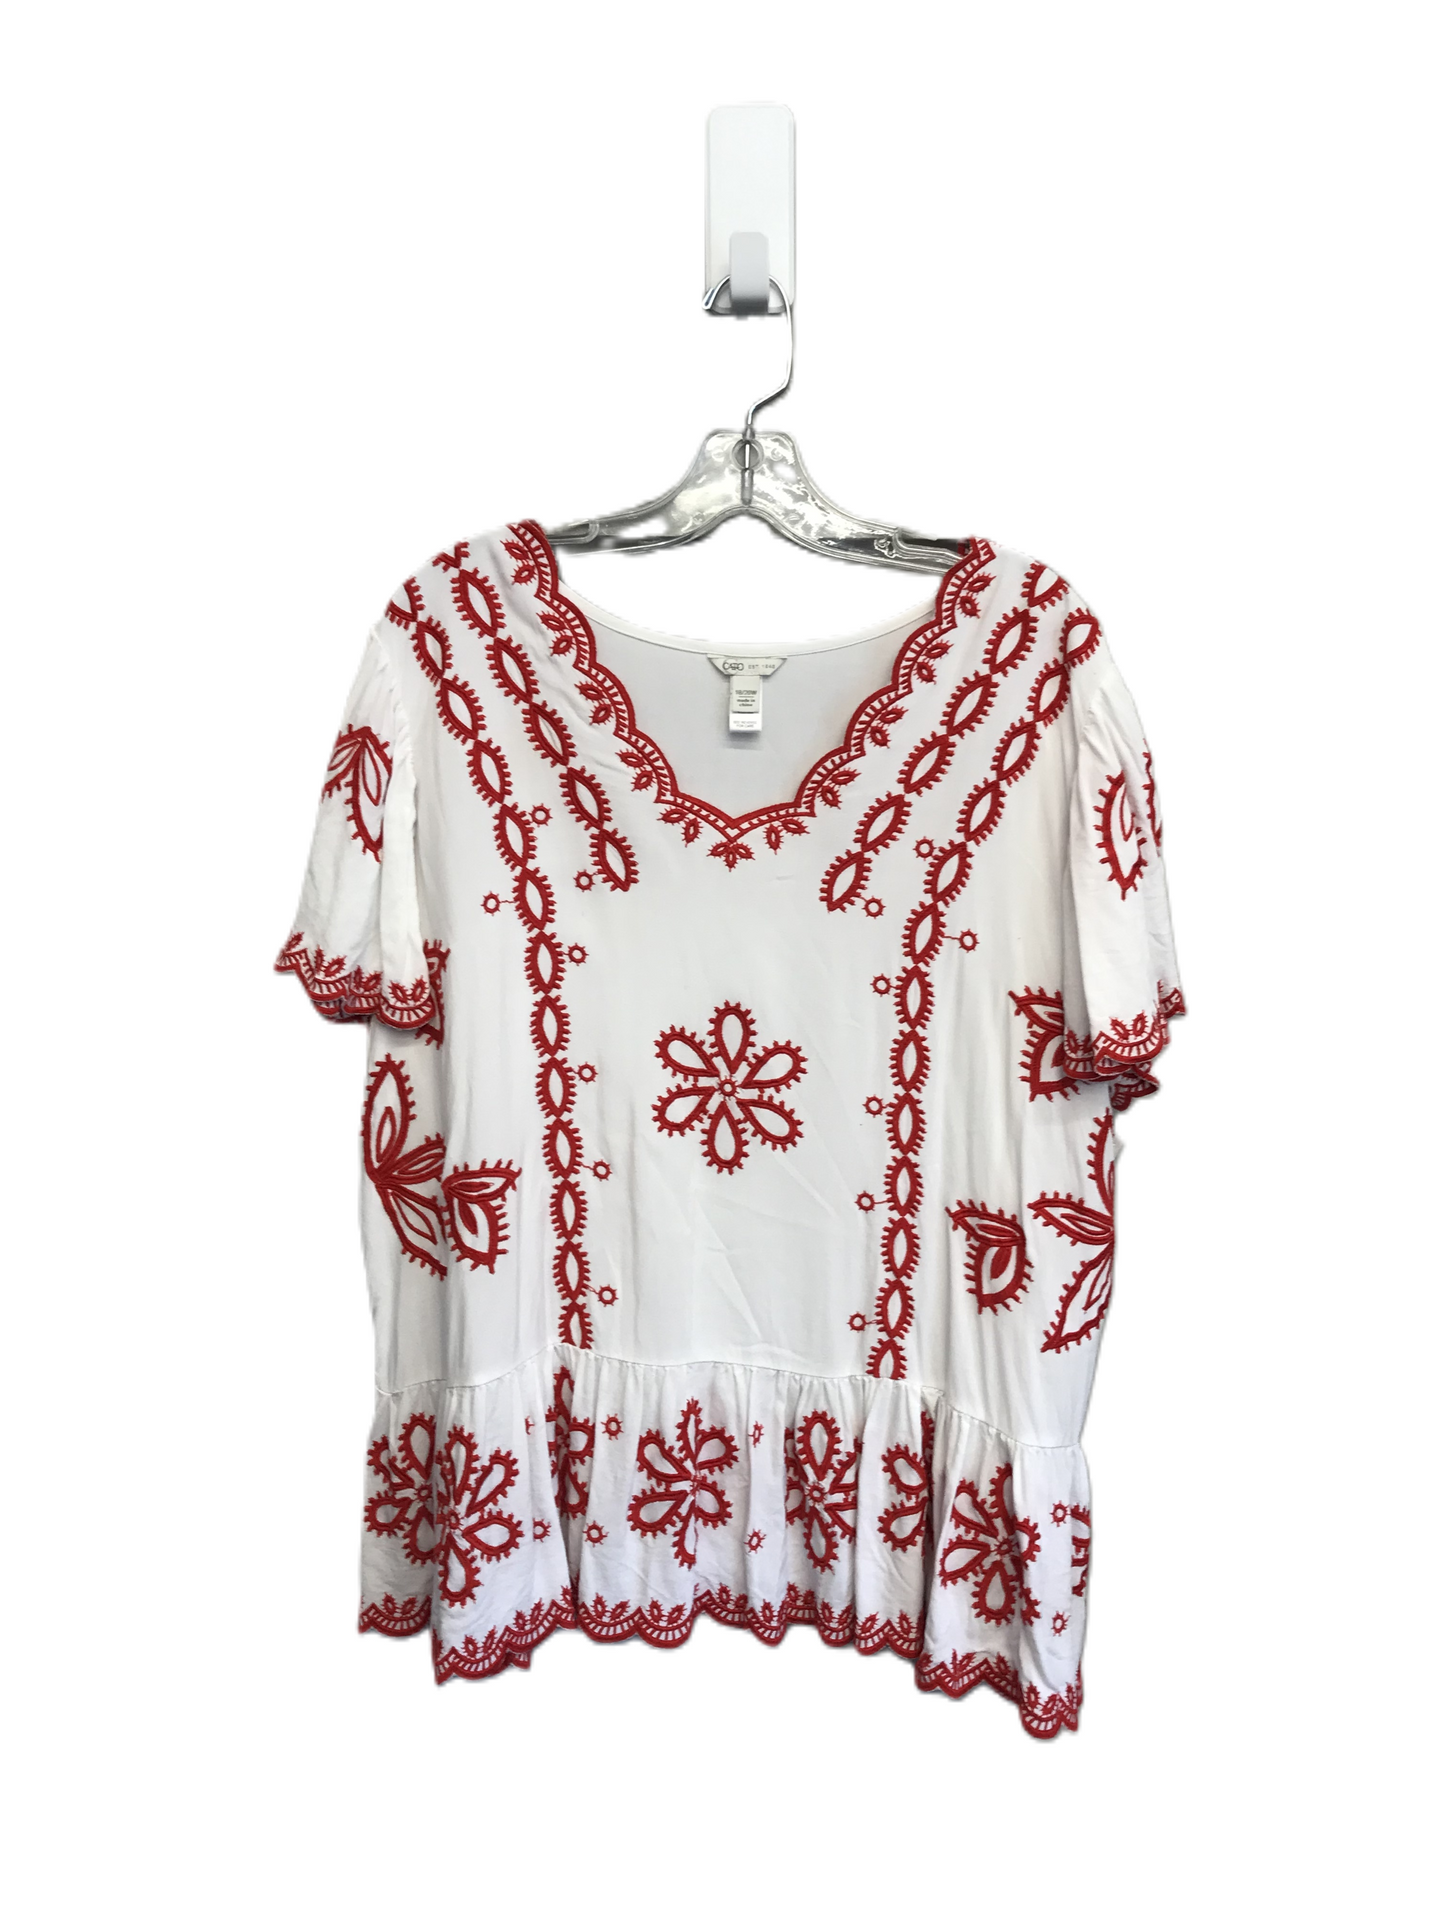 Red & White Top Short Sleeve By Cato, Size: 1x